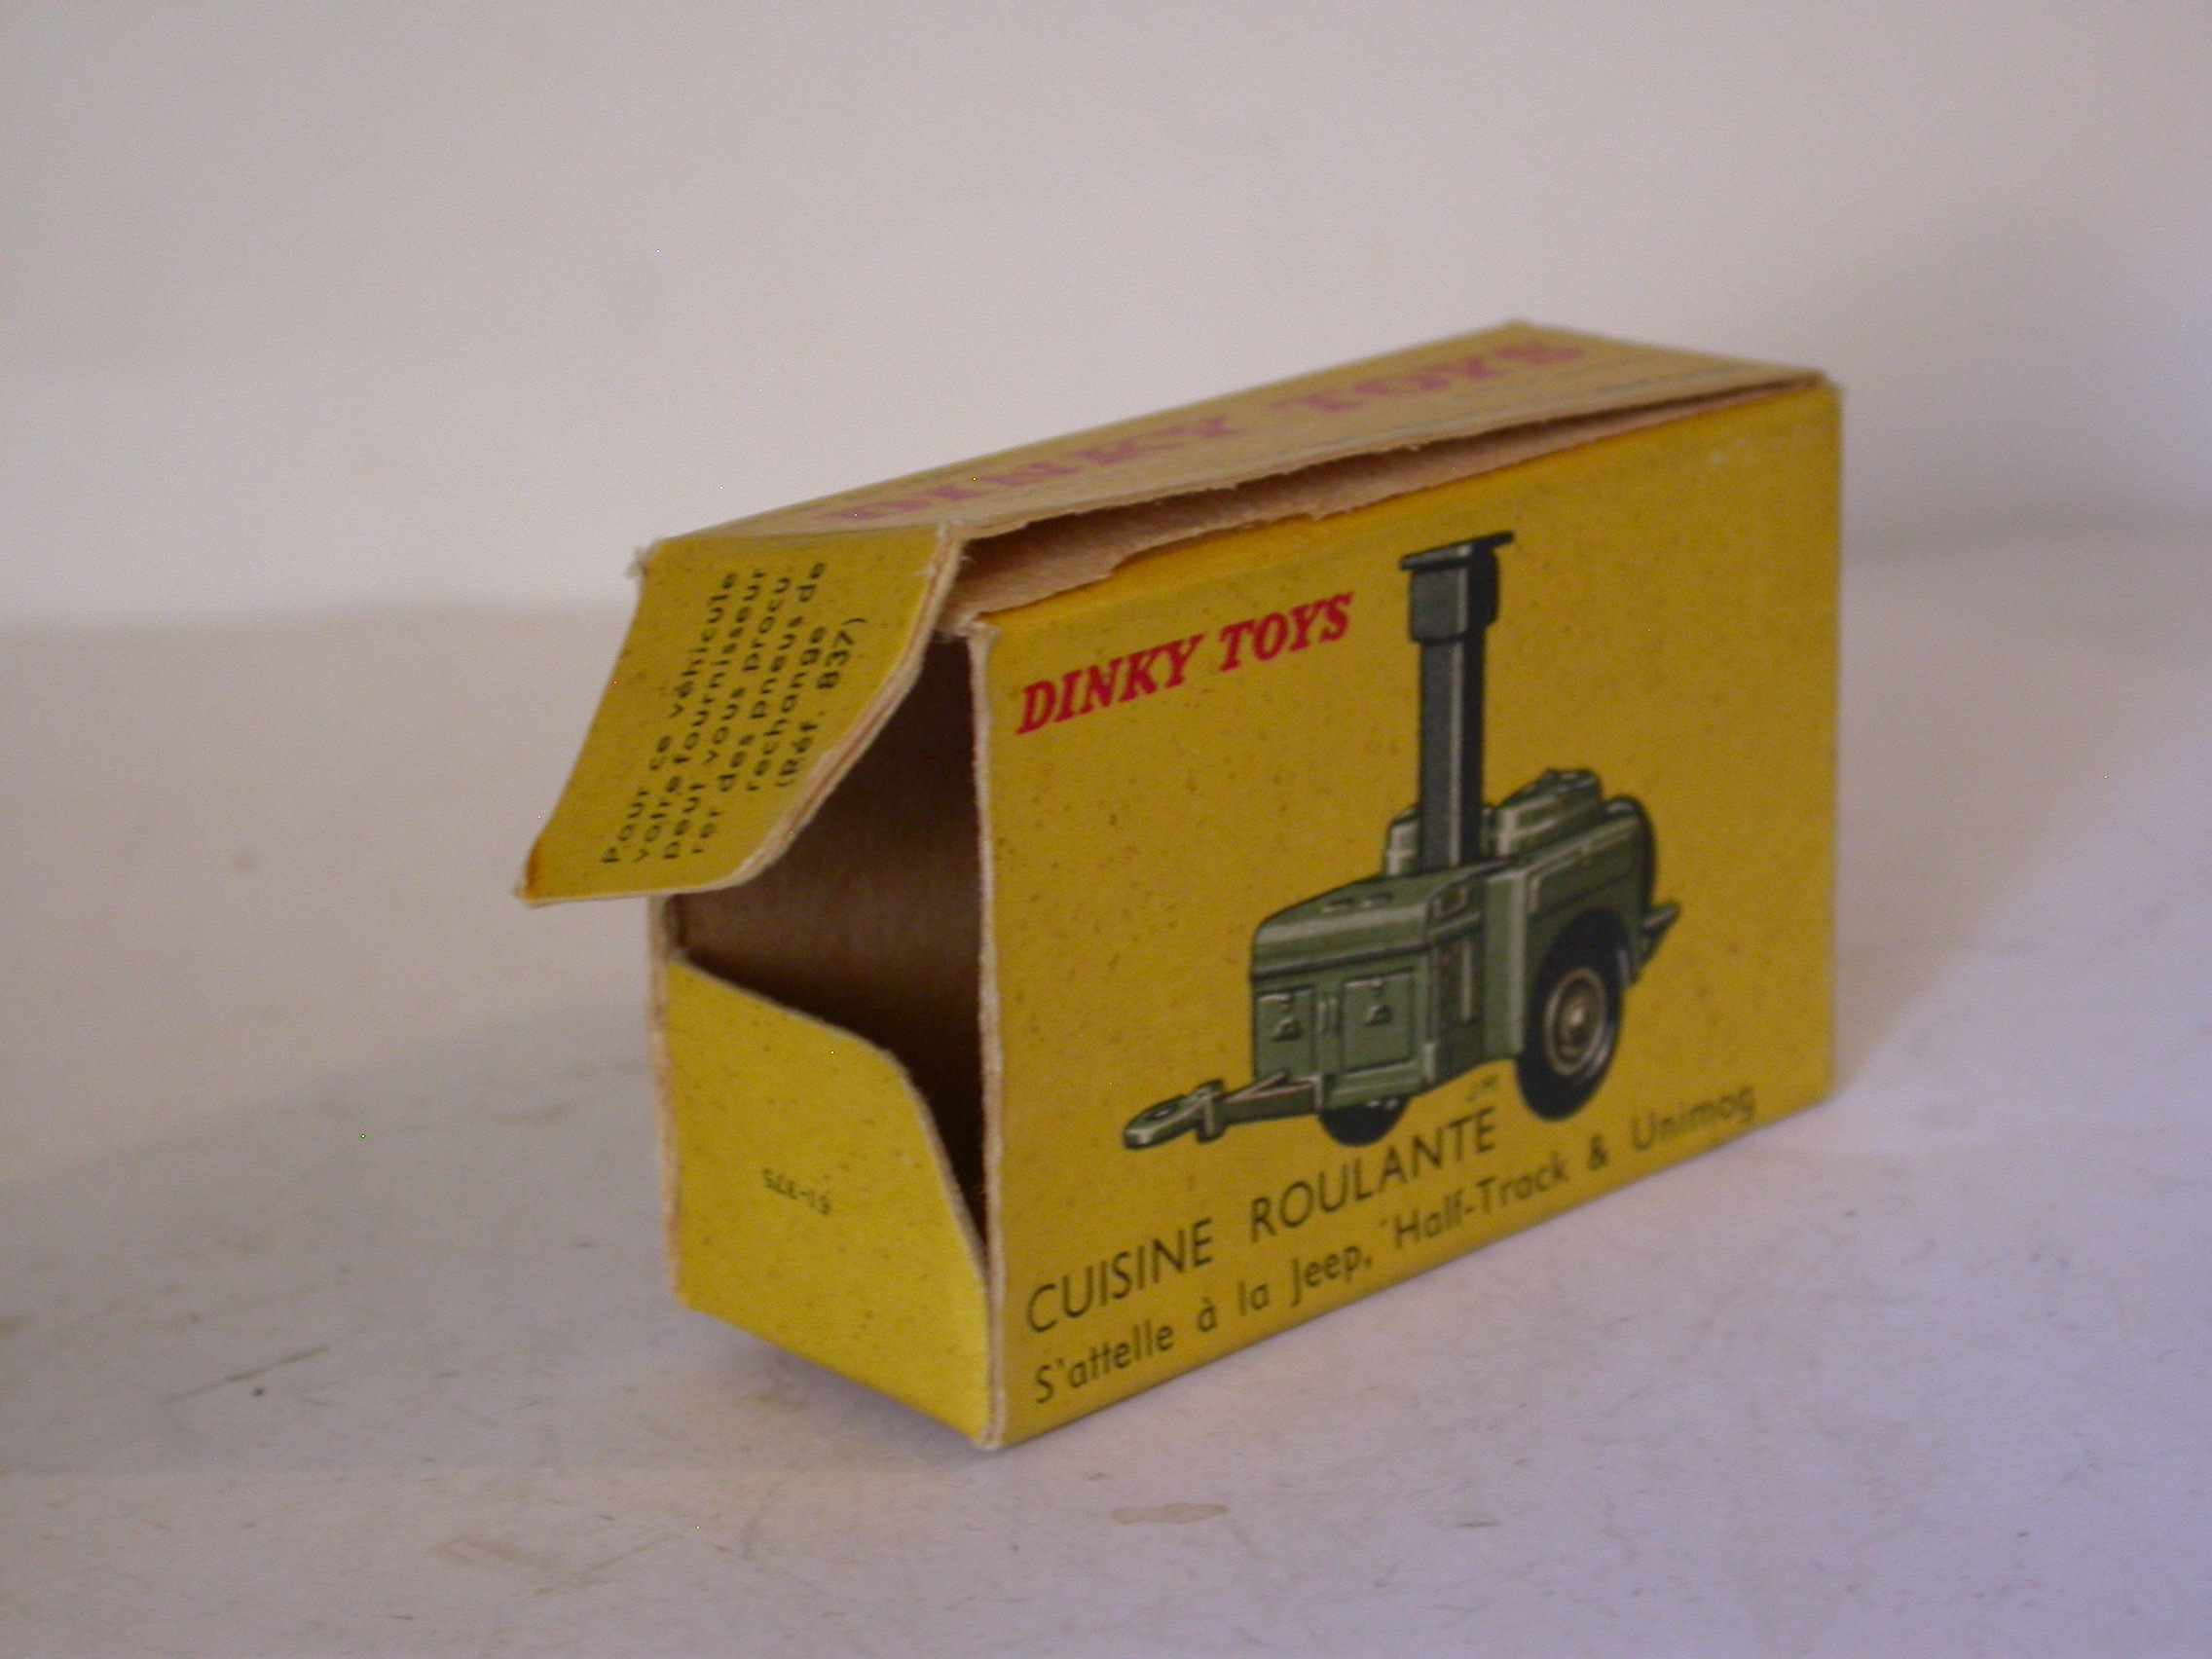 Dinky Toys France Cuisine roulante militaire